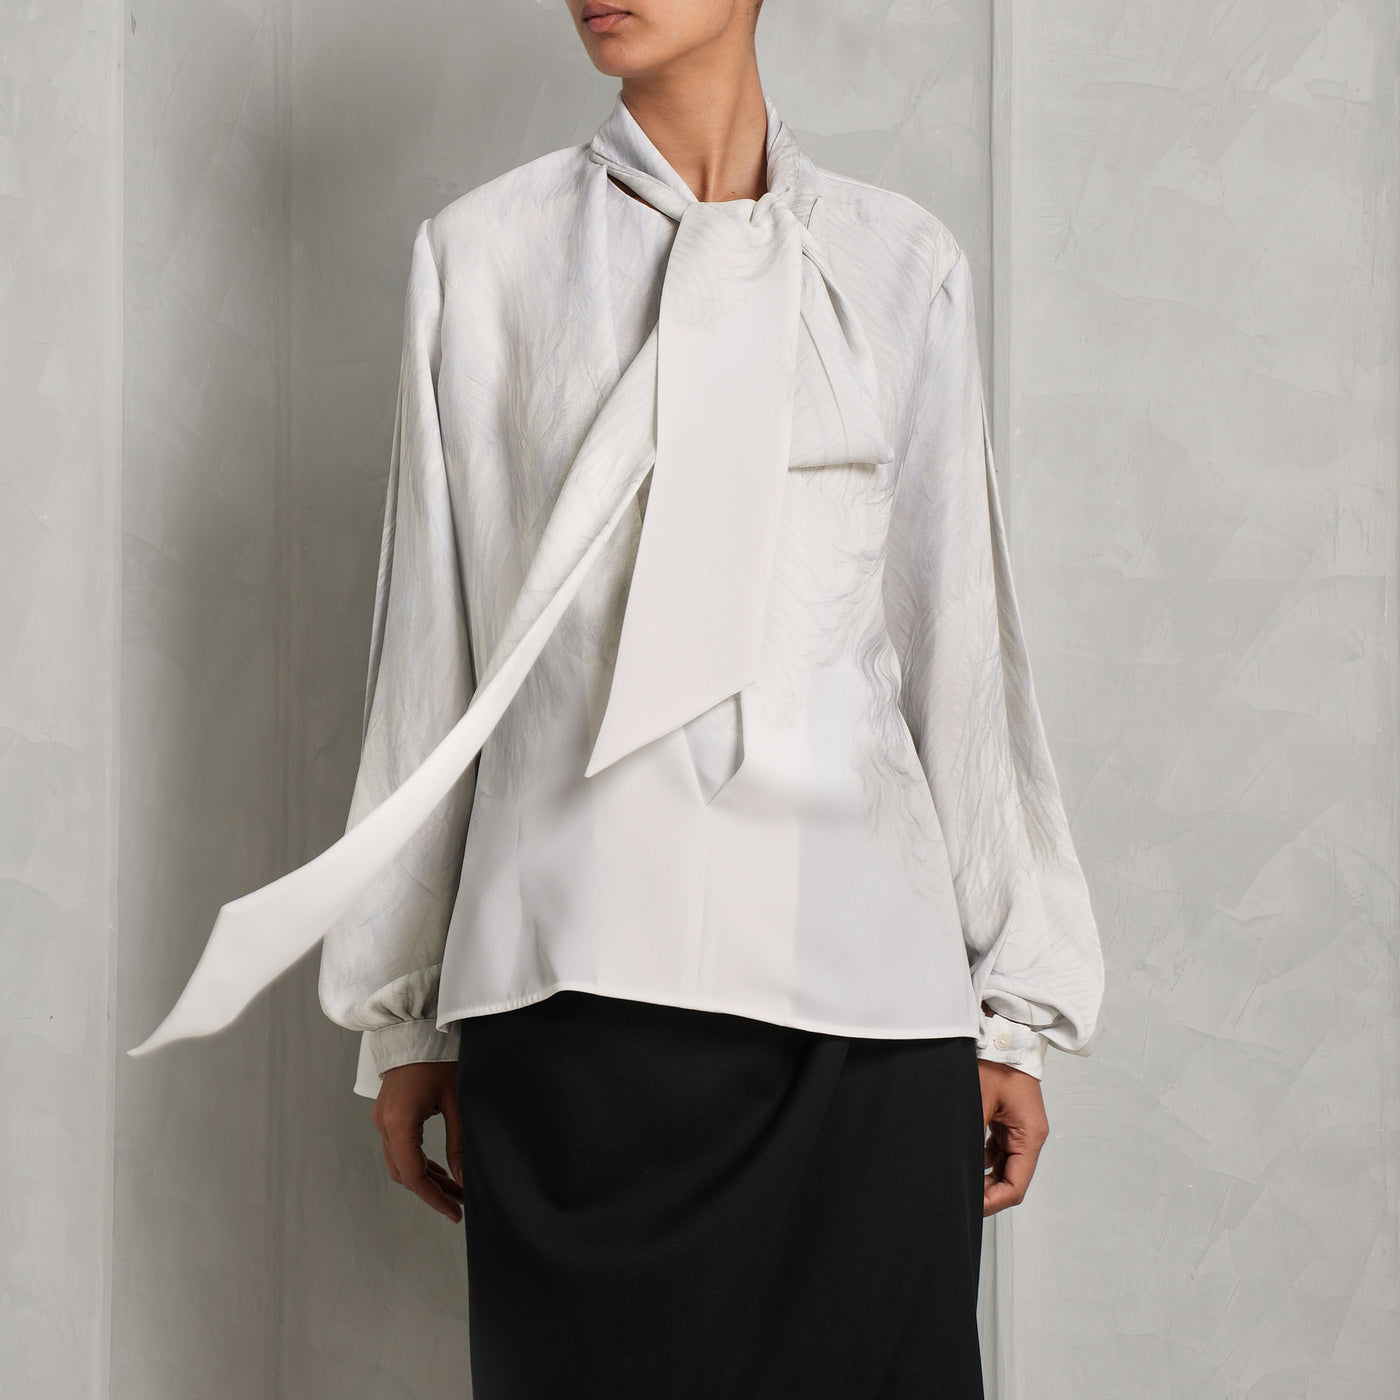 VICTORIA BECKHAM white blouse with scarf